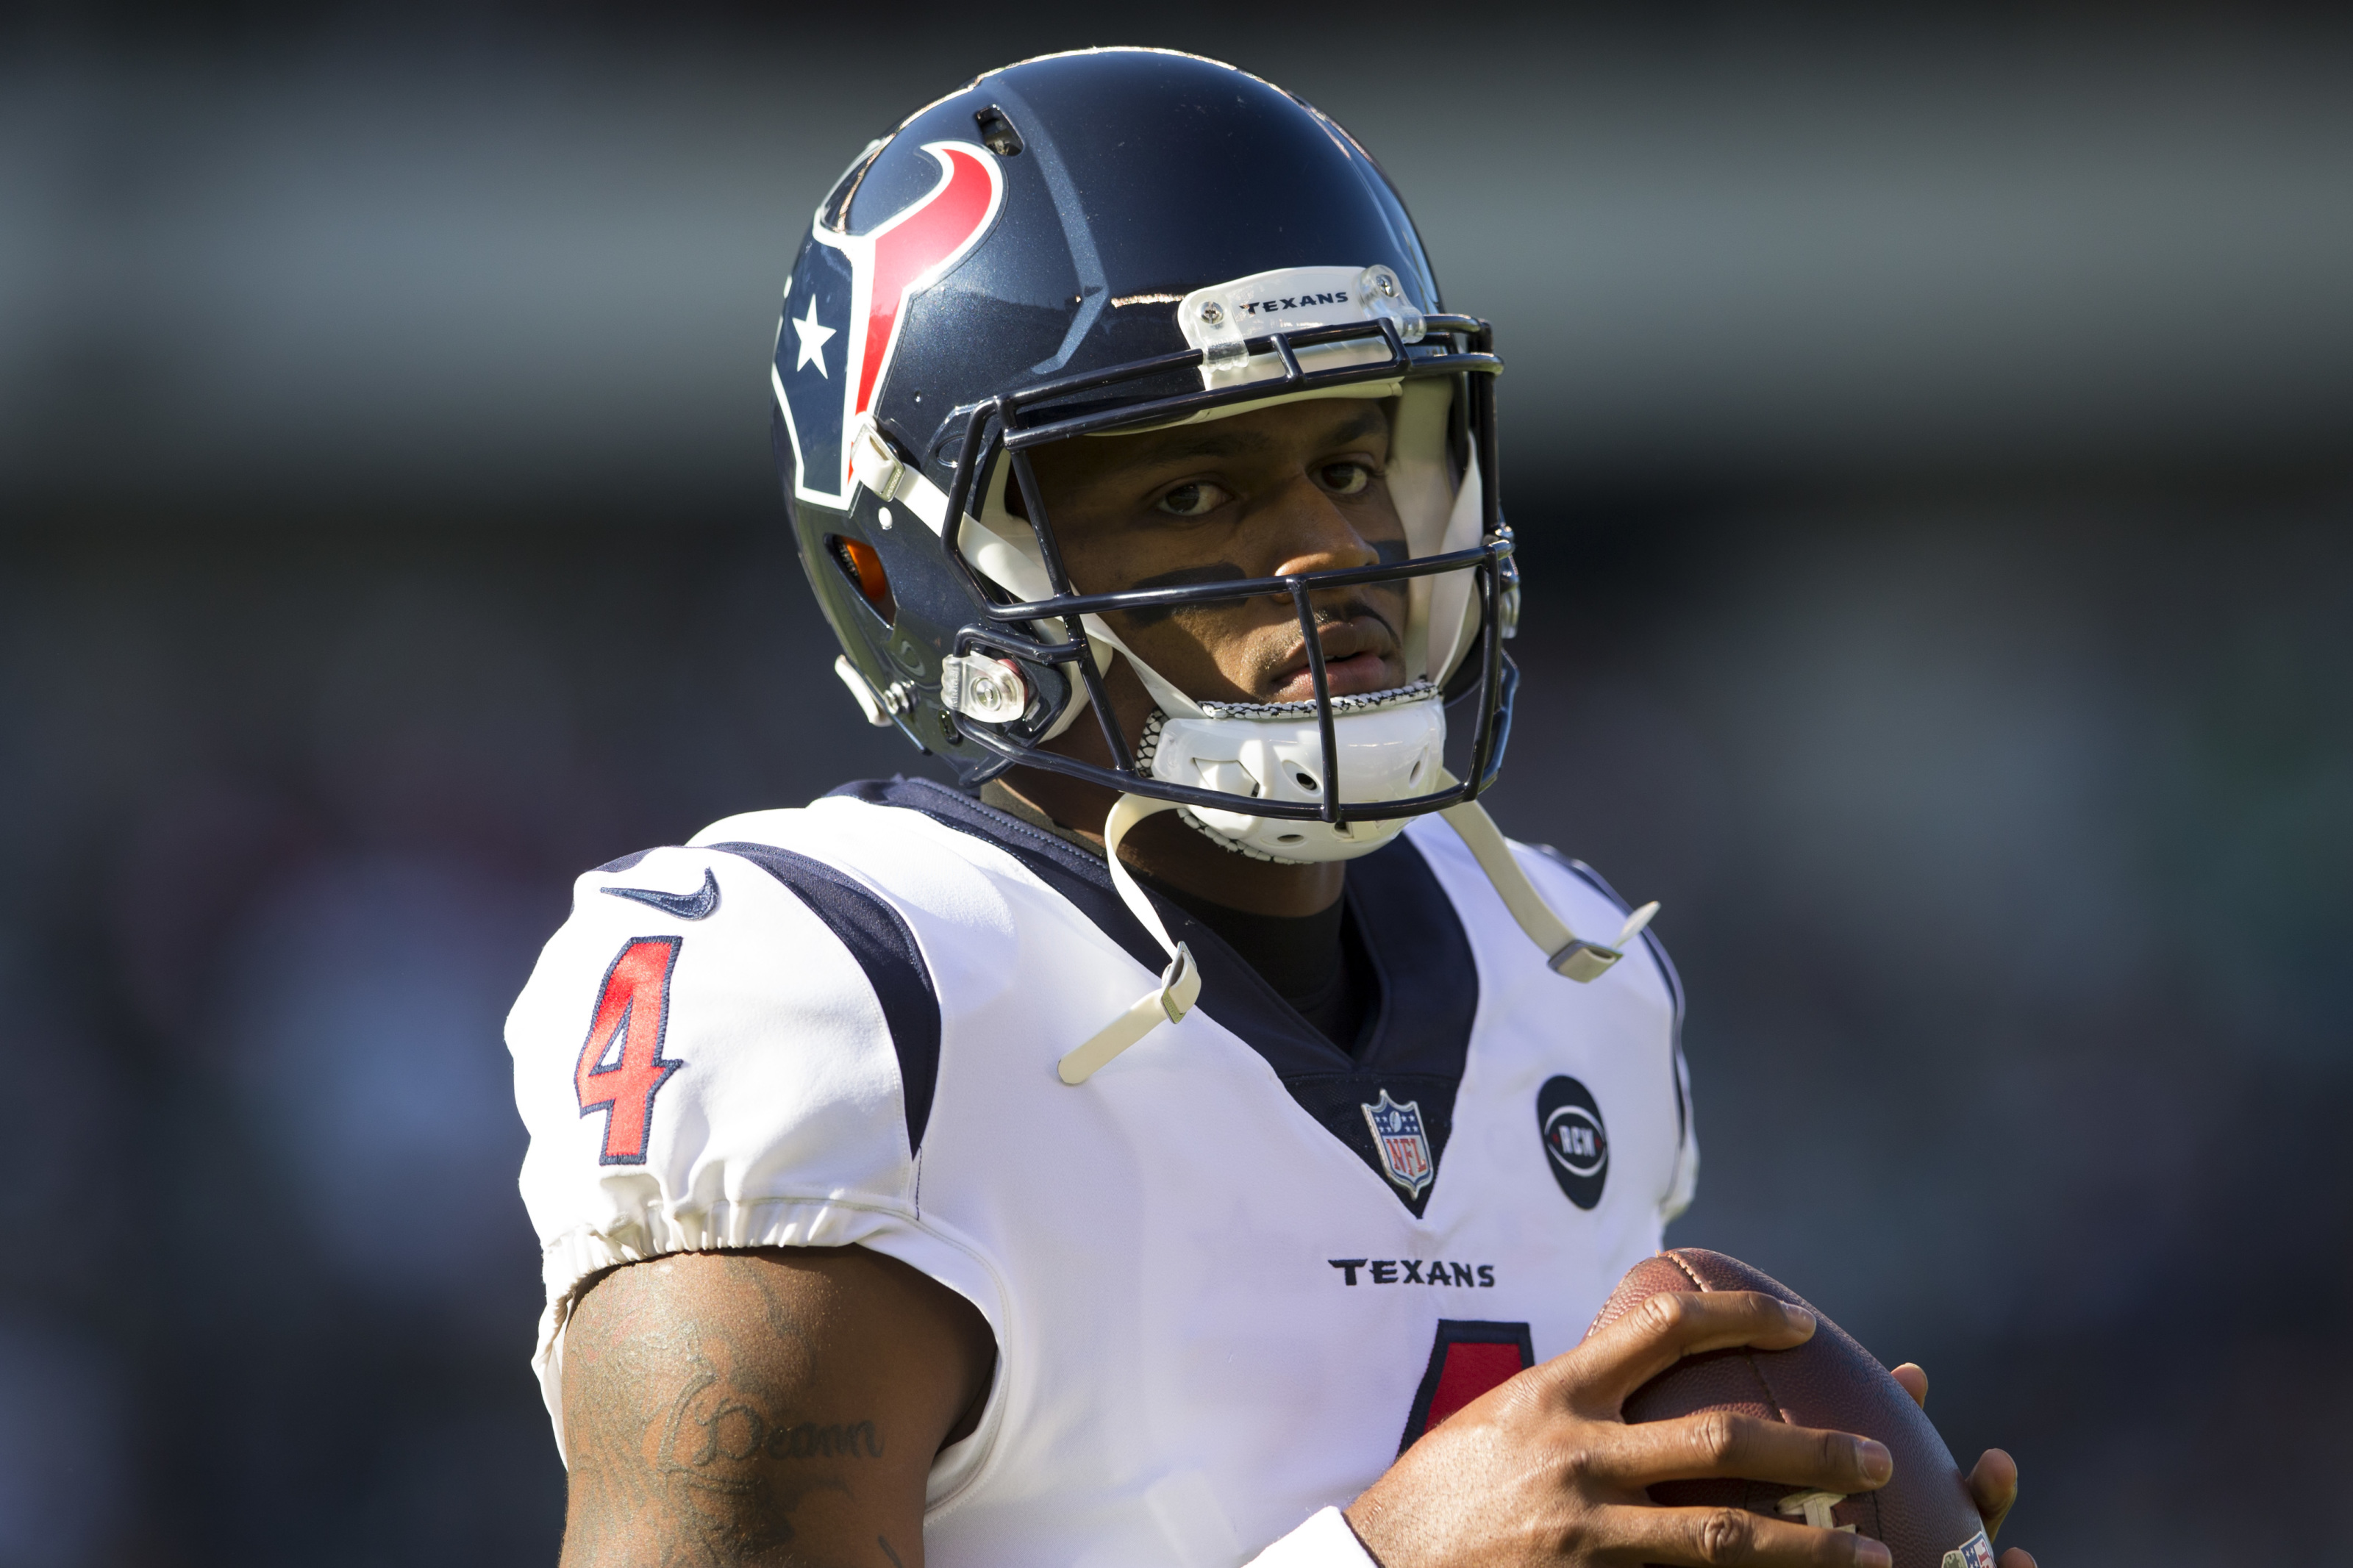 Houston Texans vs Jaguars: What's at stake for the playoff picture